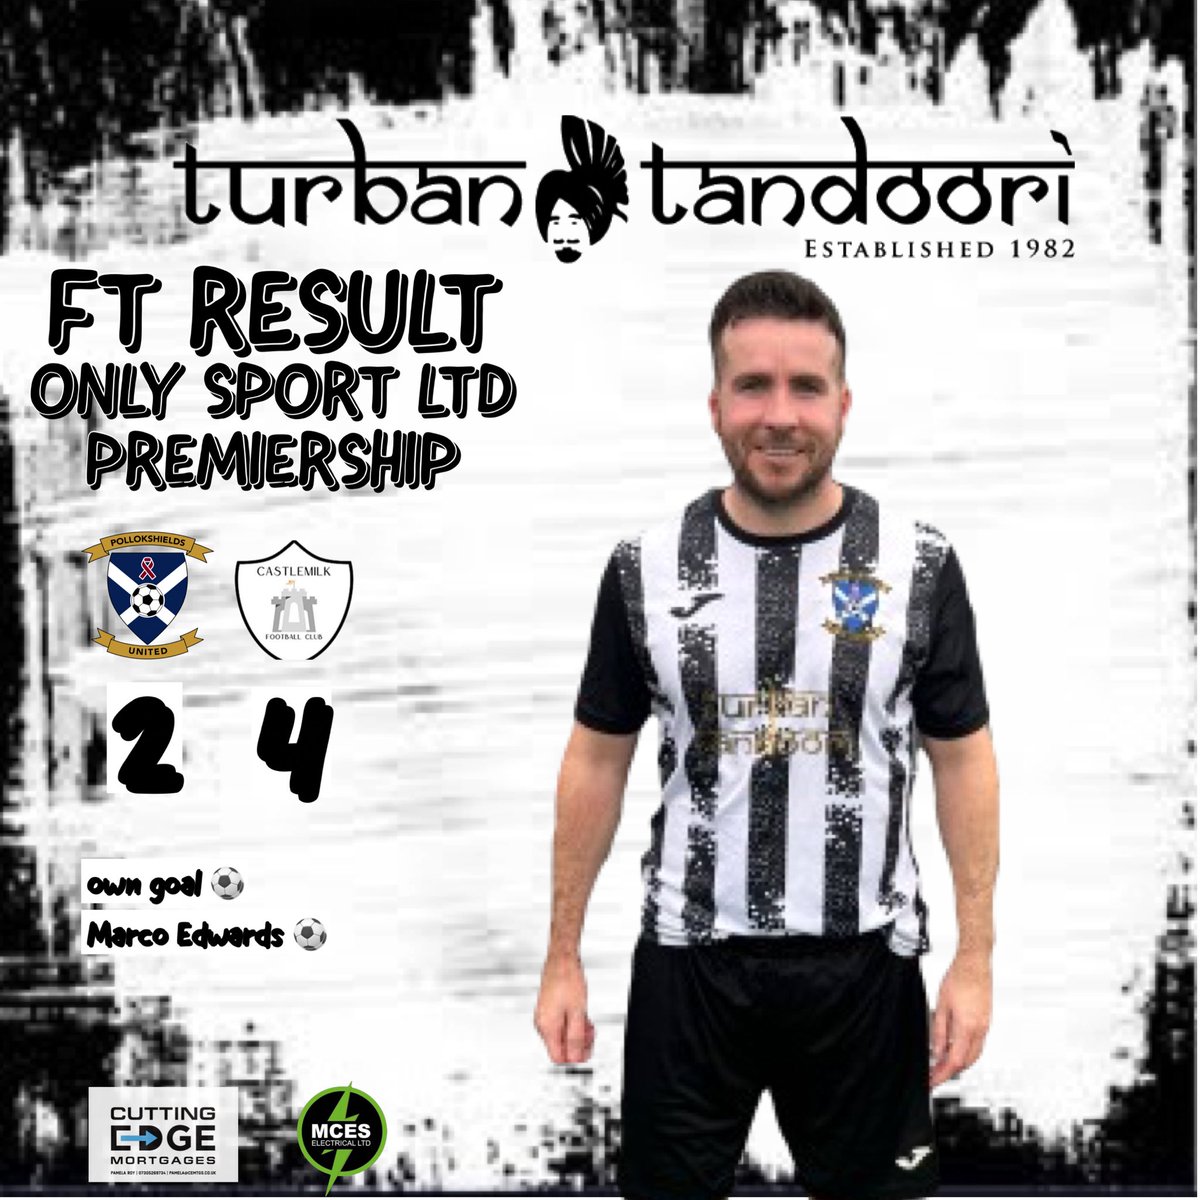 Sun FT Result;

🏆 @OnlySportLTD1  Premiership
⚽️ Pollokshields 2-4 @CastlemilkFc 

Not good enough from us,  were up against a good team but some preventable goals as coming from our mistakes 

well done to Castlemilk, well deserved win, all best for remainder of season